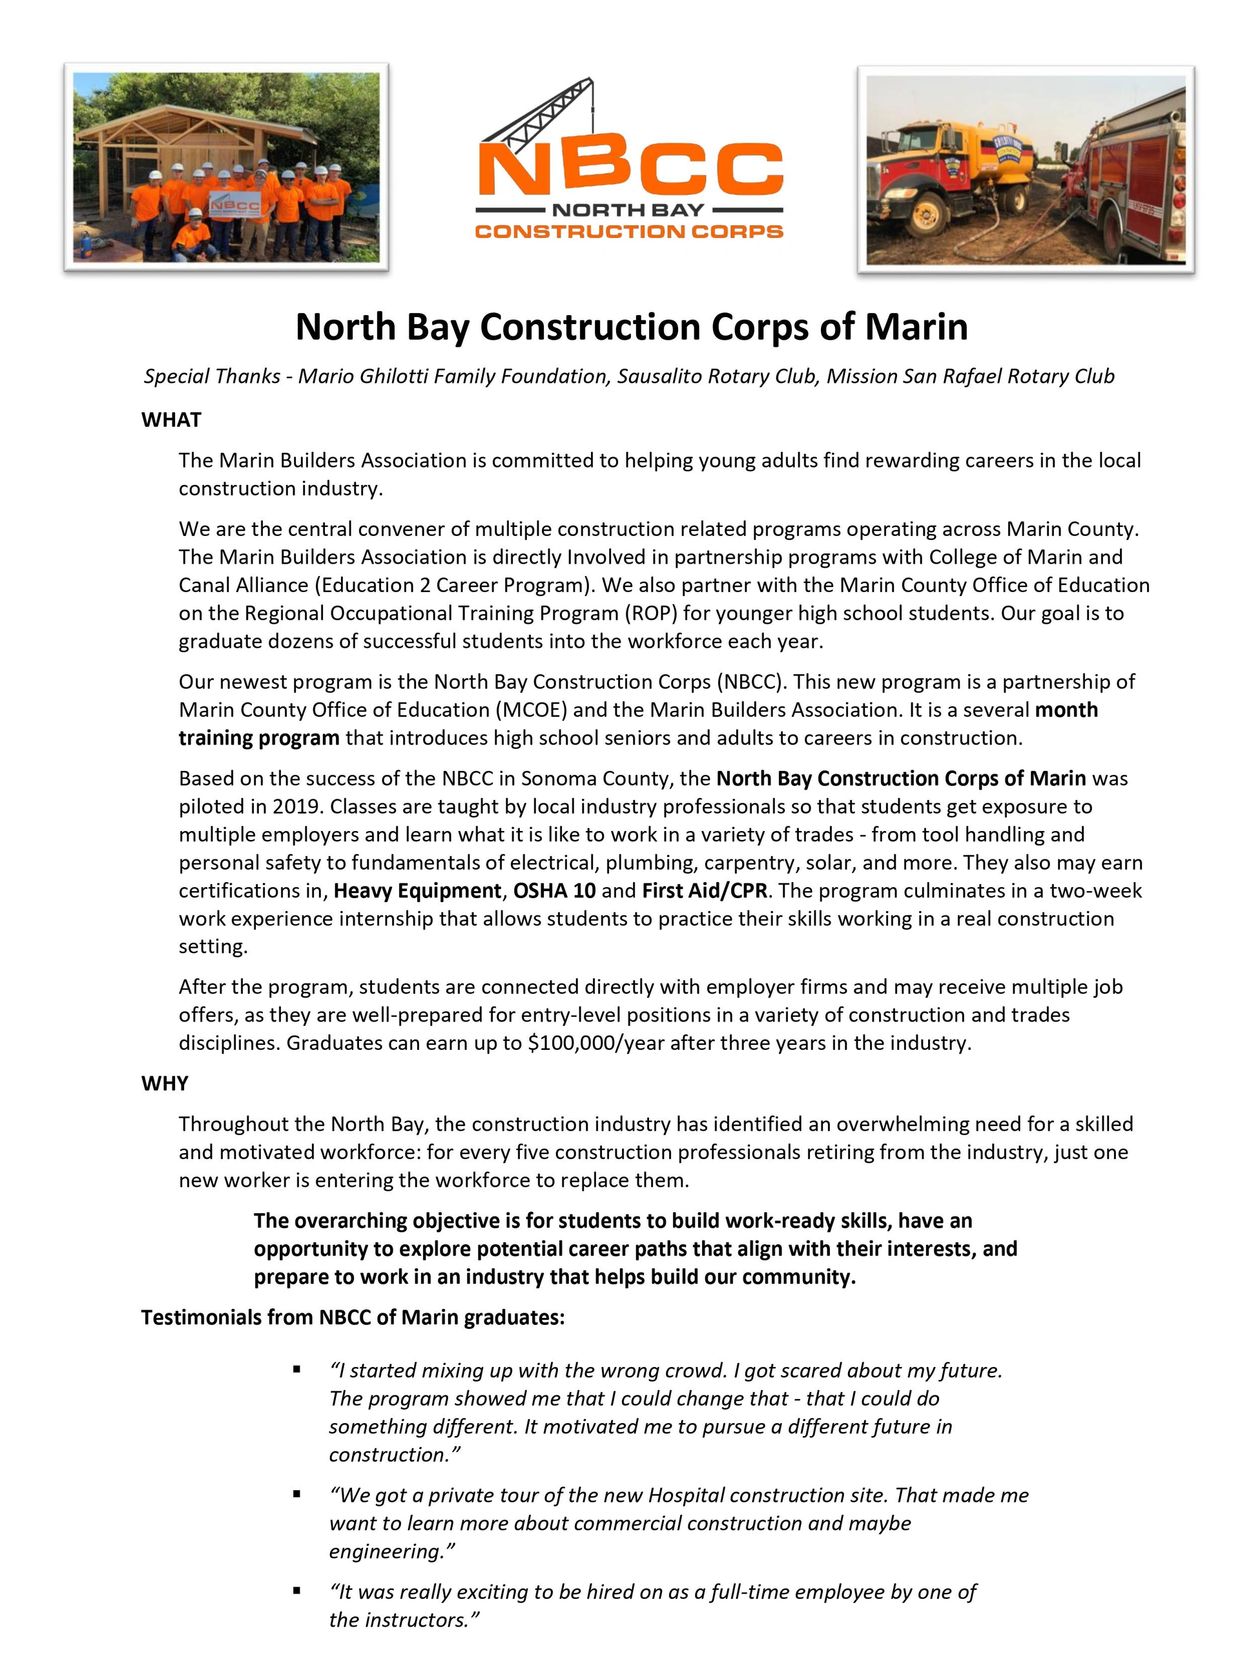 All about North Construction Corps of Marin